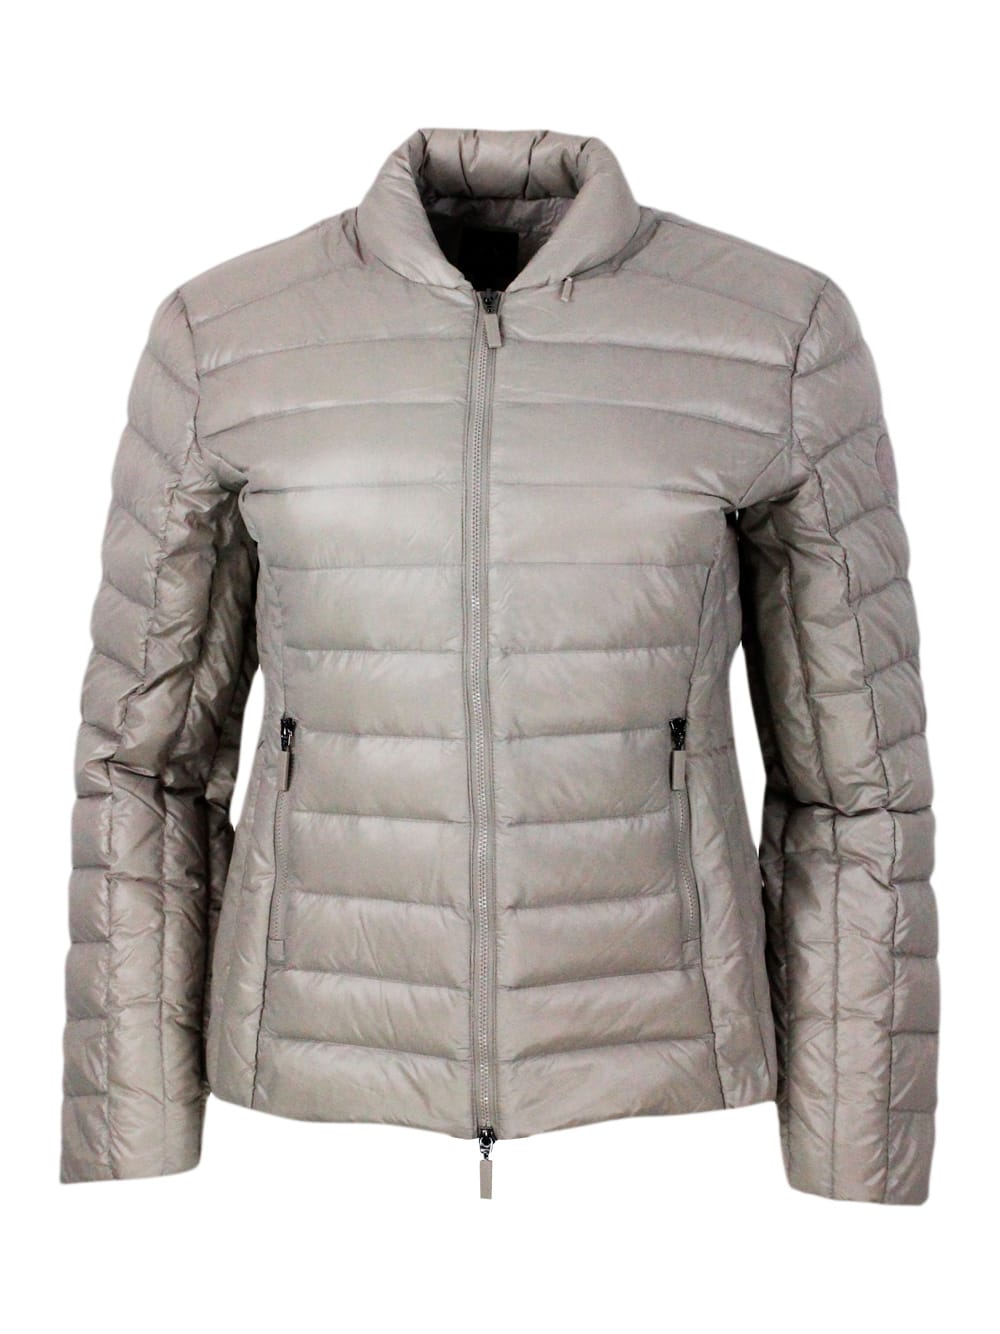 Lightweight 100 Gram Slim Down Jacket With Integrated Concealed Hood And Zip Closure